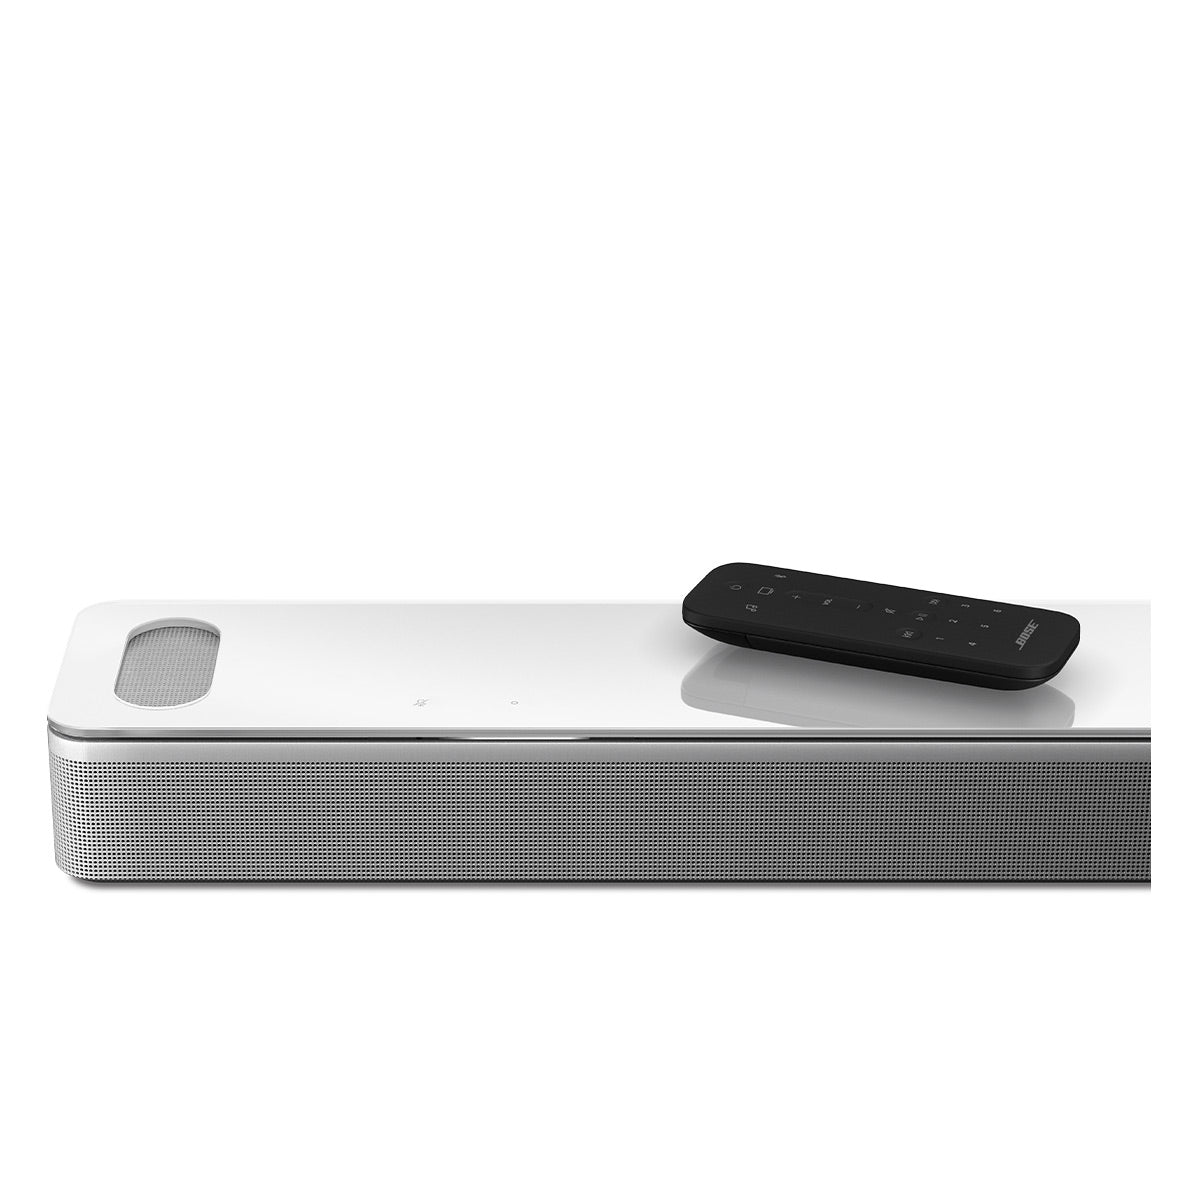 Subwoofer System Theater Stereo 700 with Wide World Bose Bass Module (White) Soundbar | 900 Home